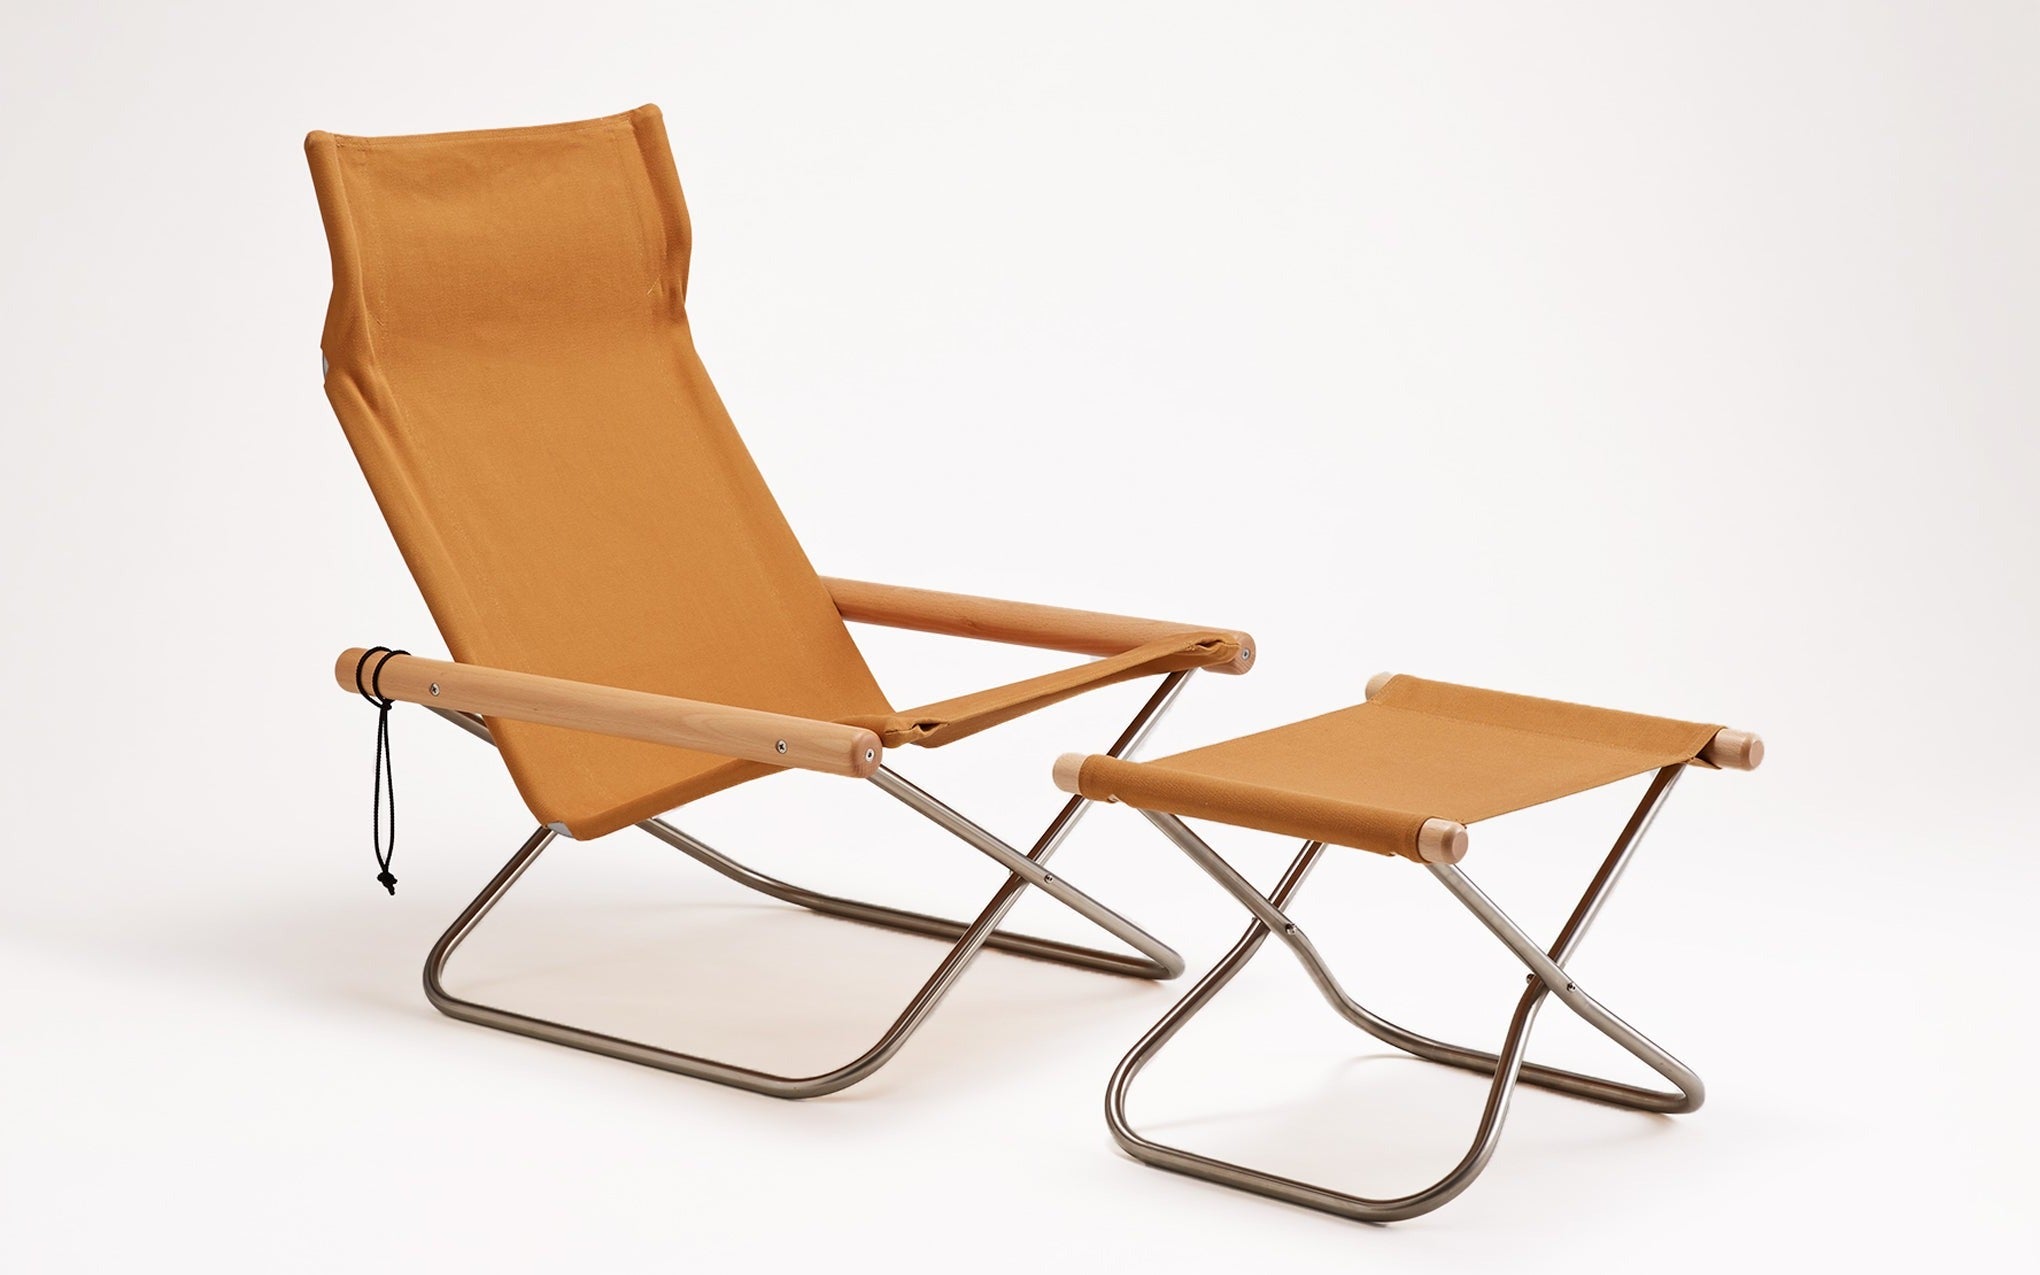 Nychair X lounge chair by Takeshi Nii | SCP